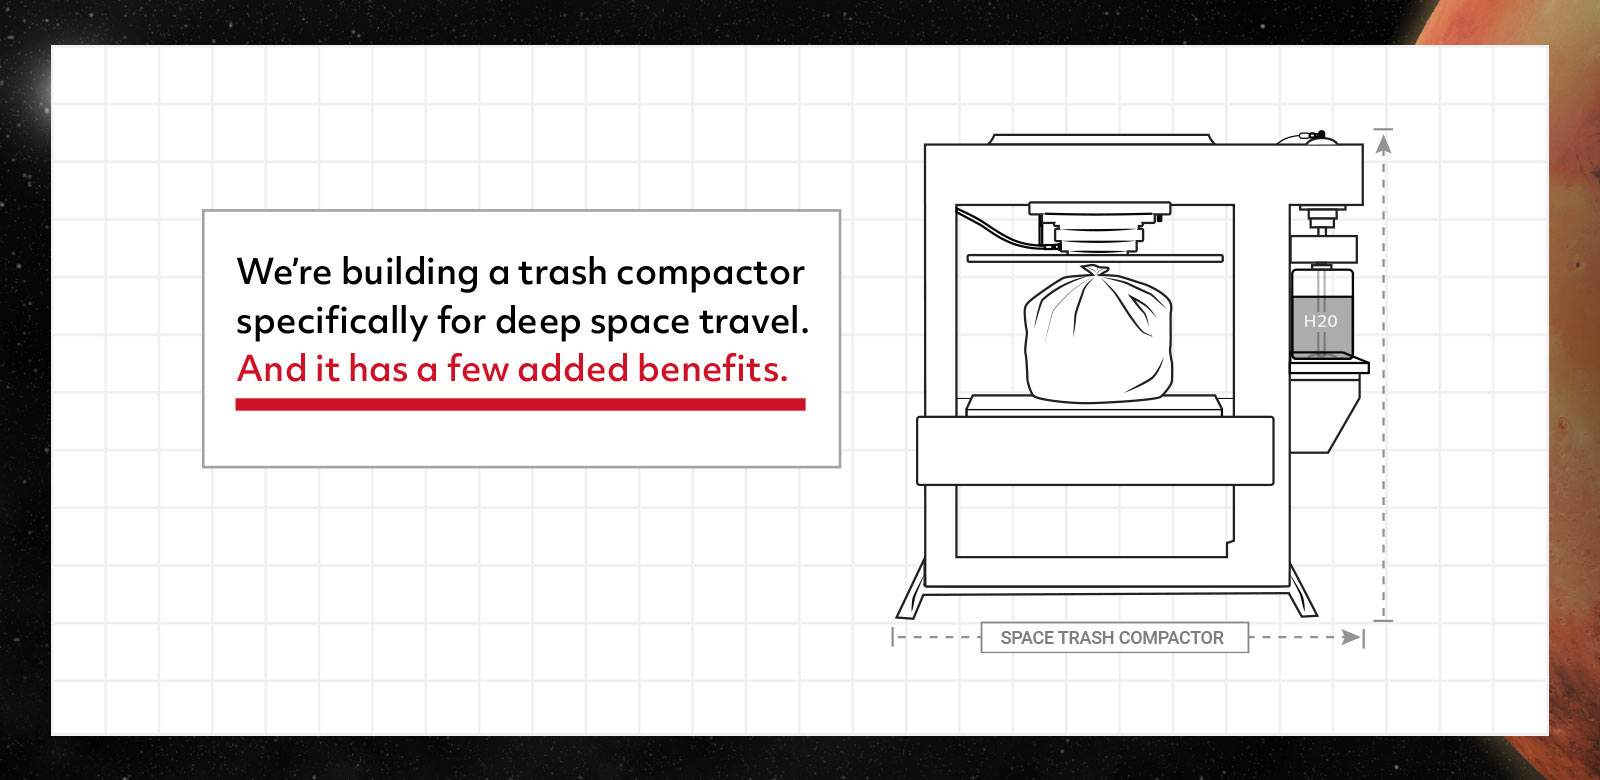 We're building a trash compactor specifically for deep space travel. And it has a few added benefits.